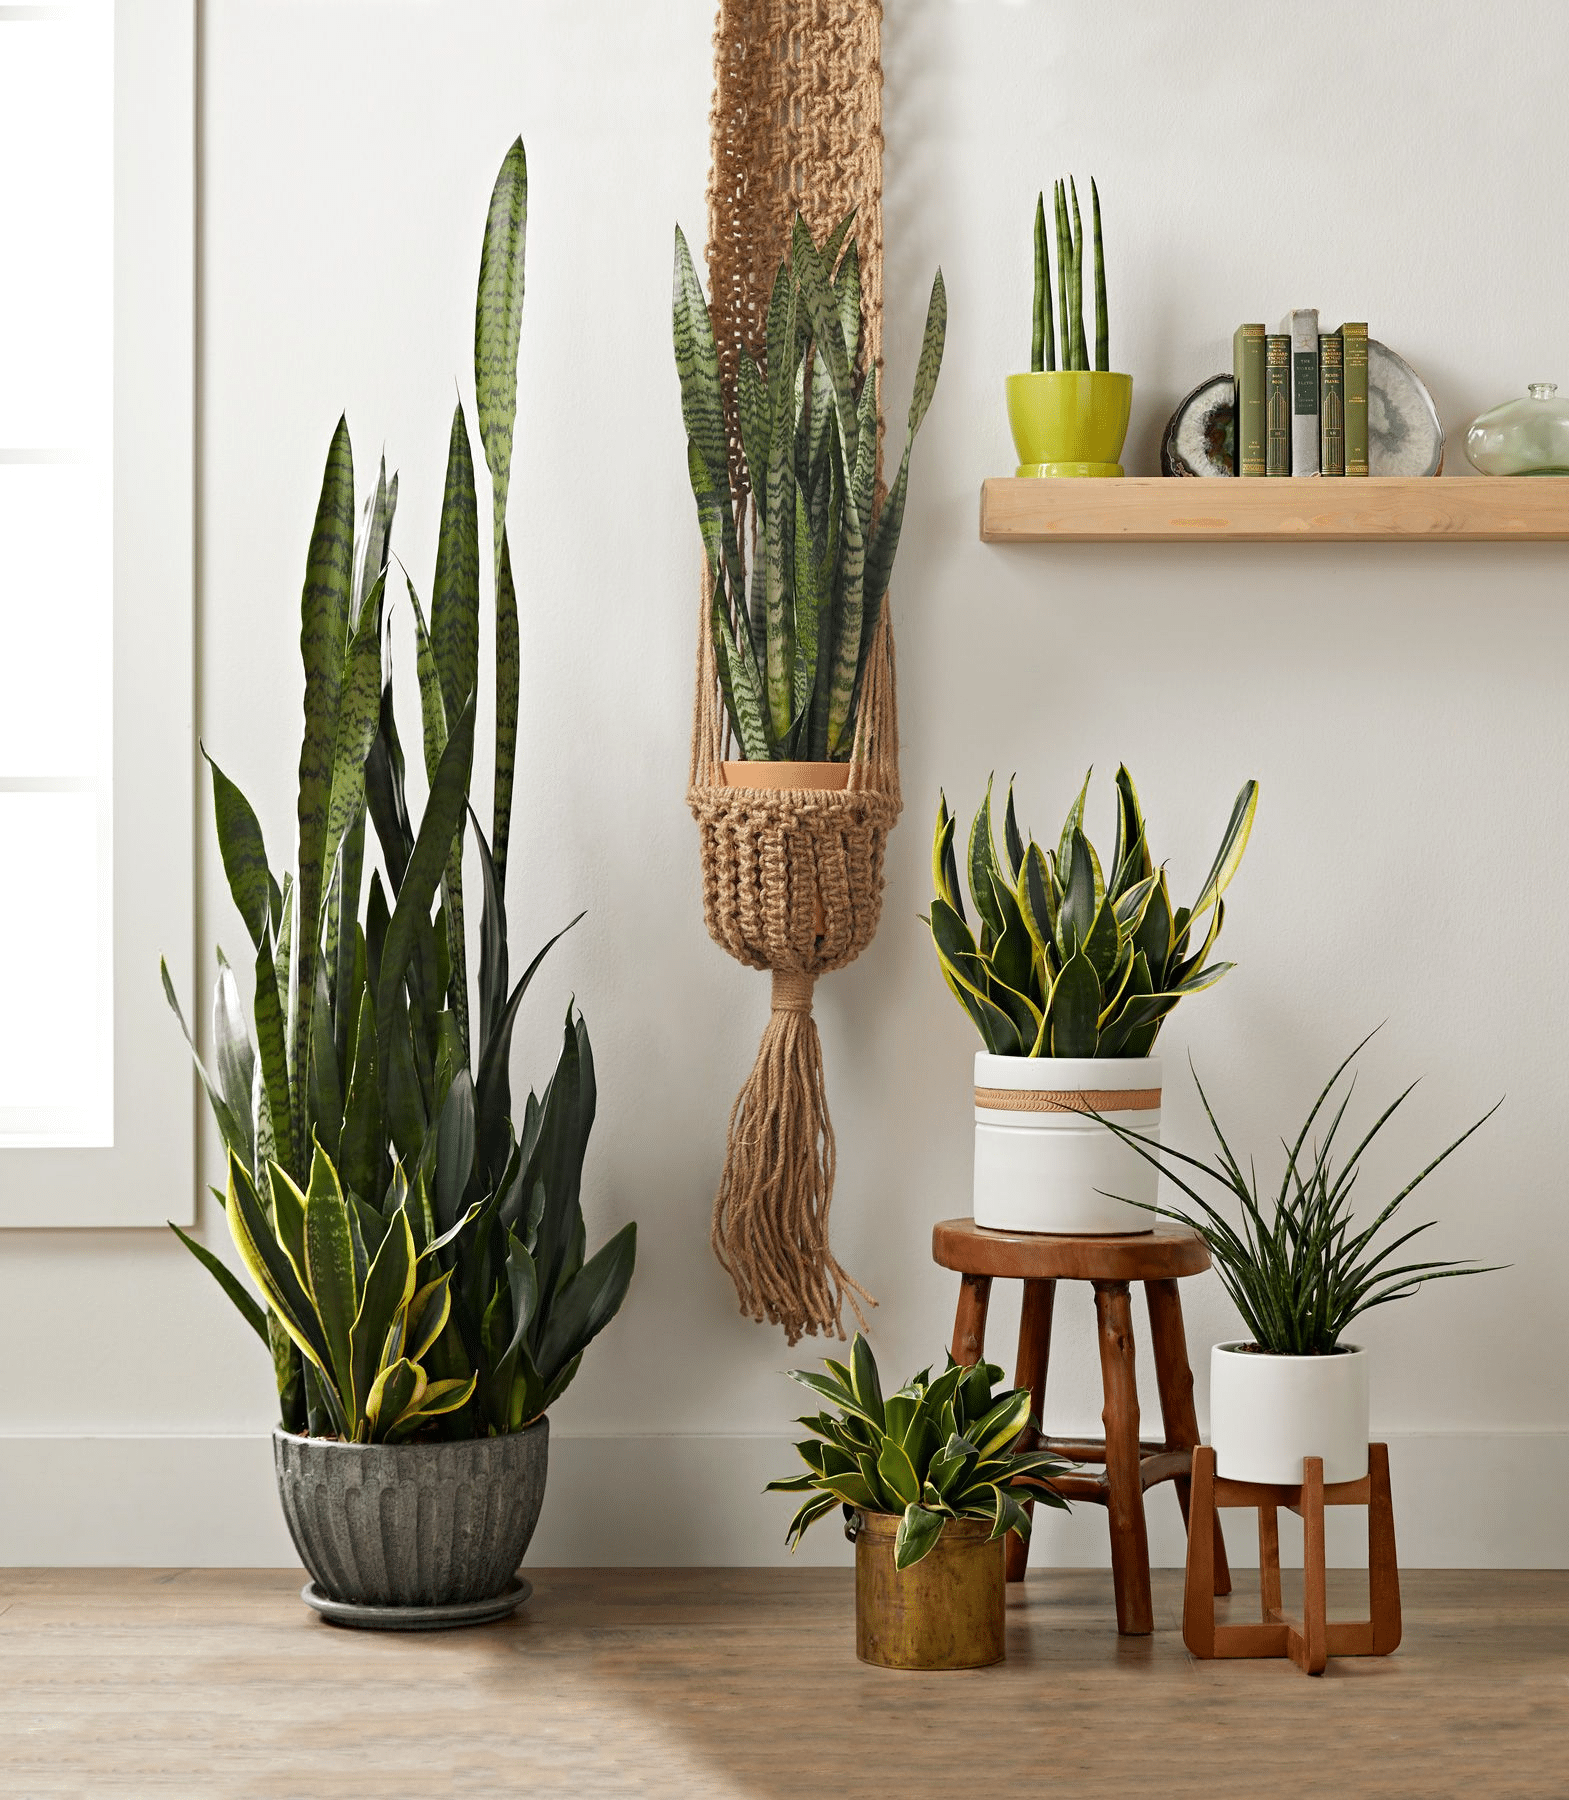 A Sansevieria plant used as a decorative element in a room